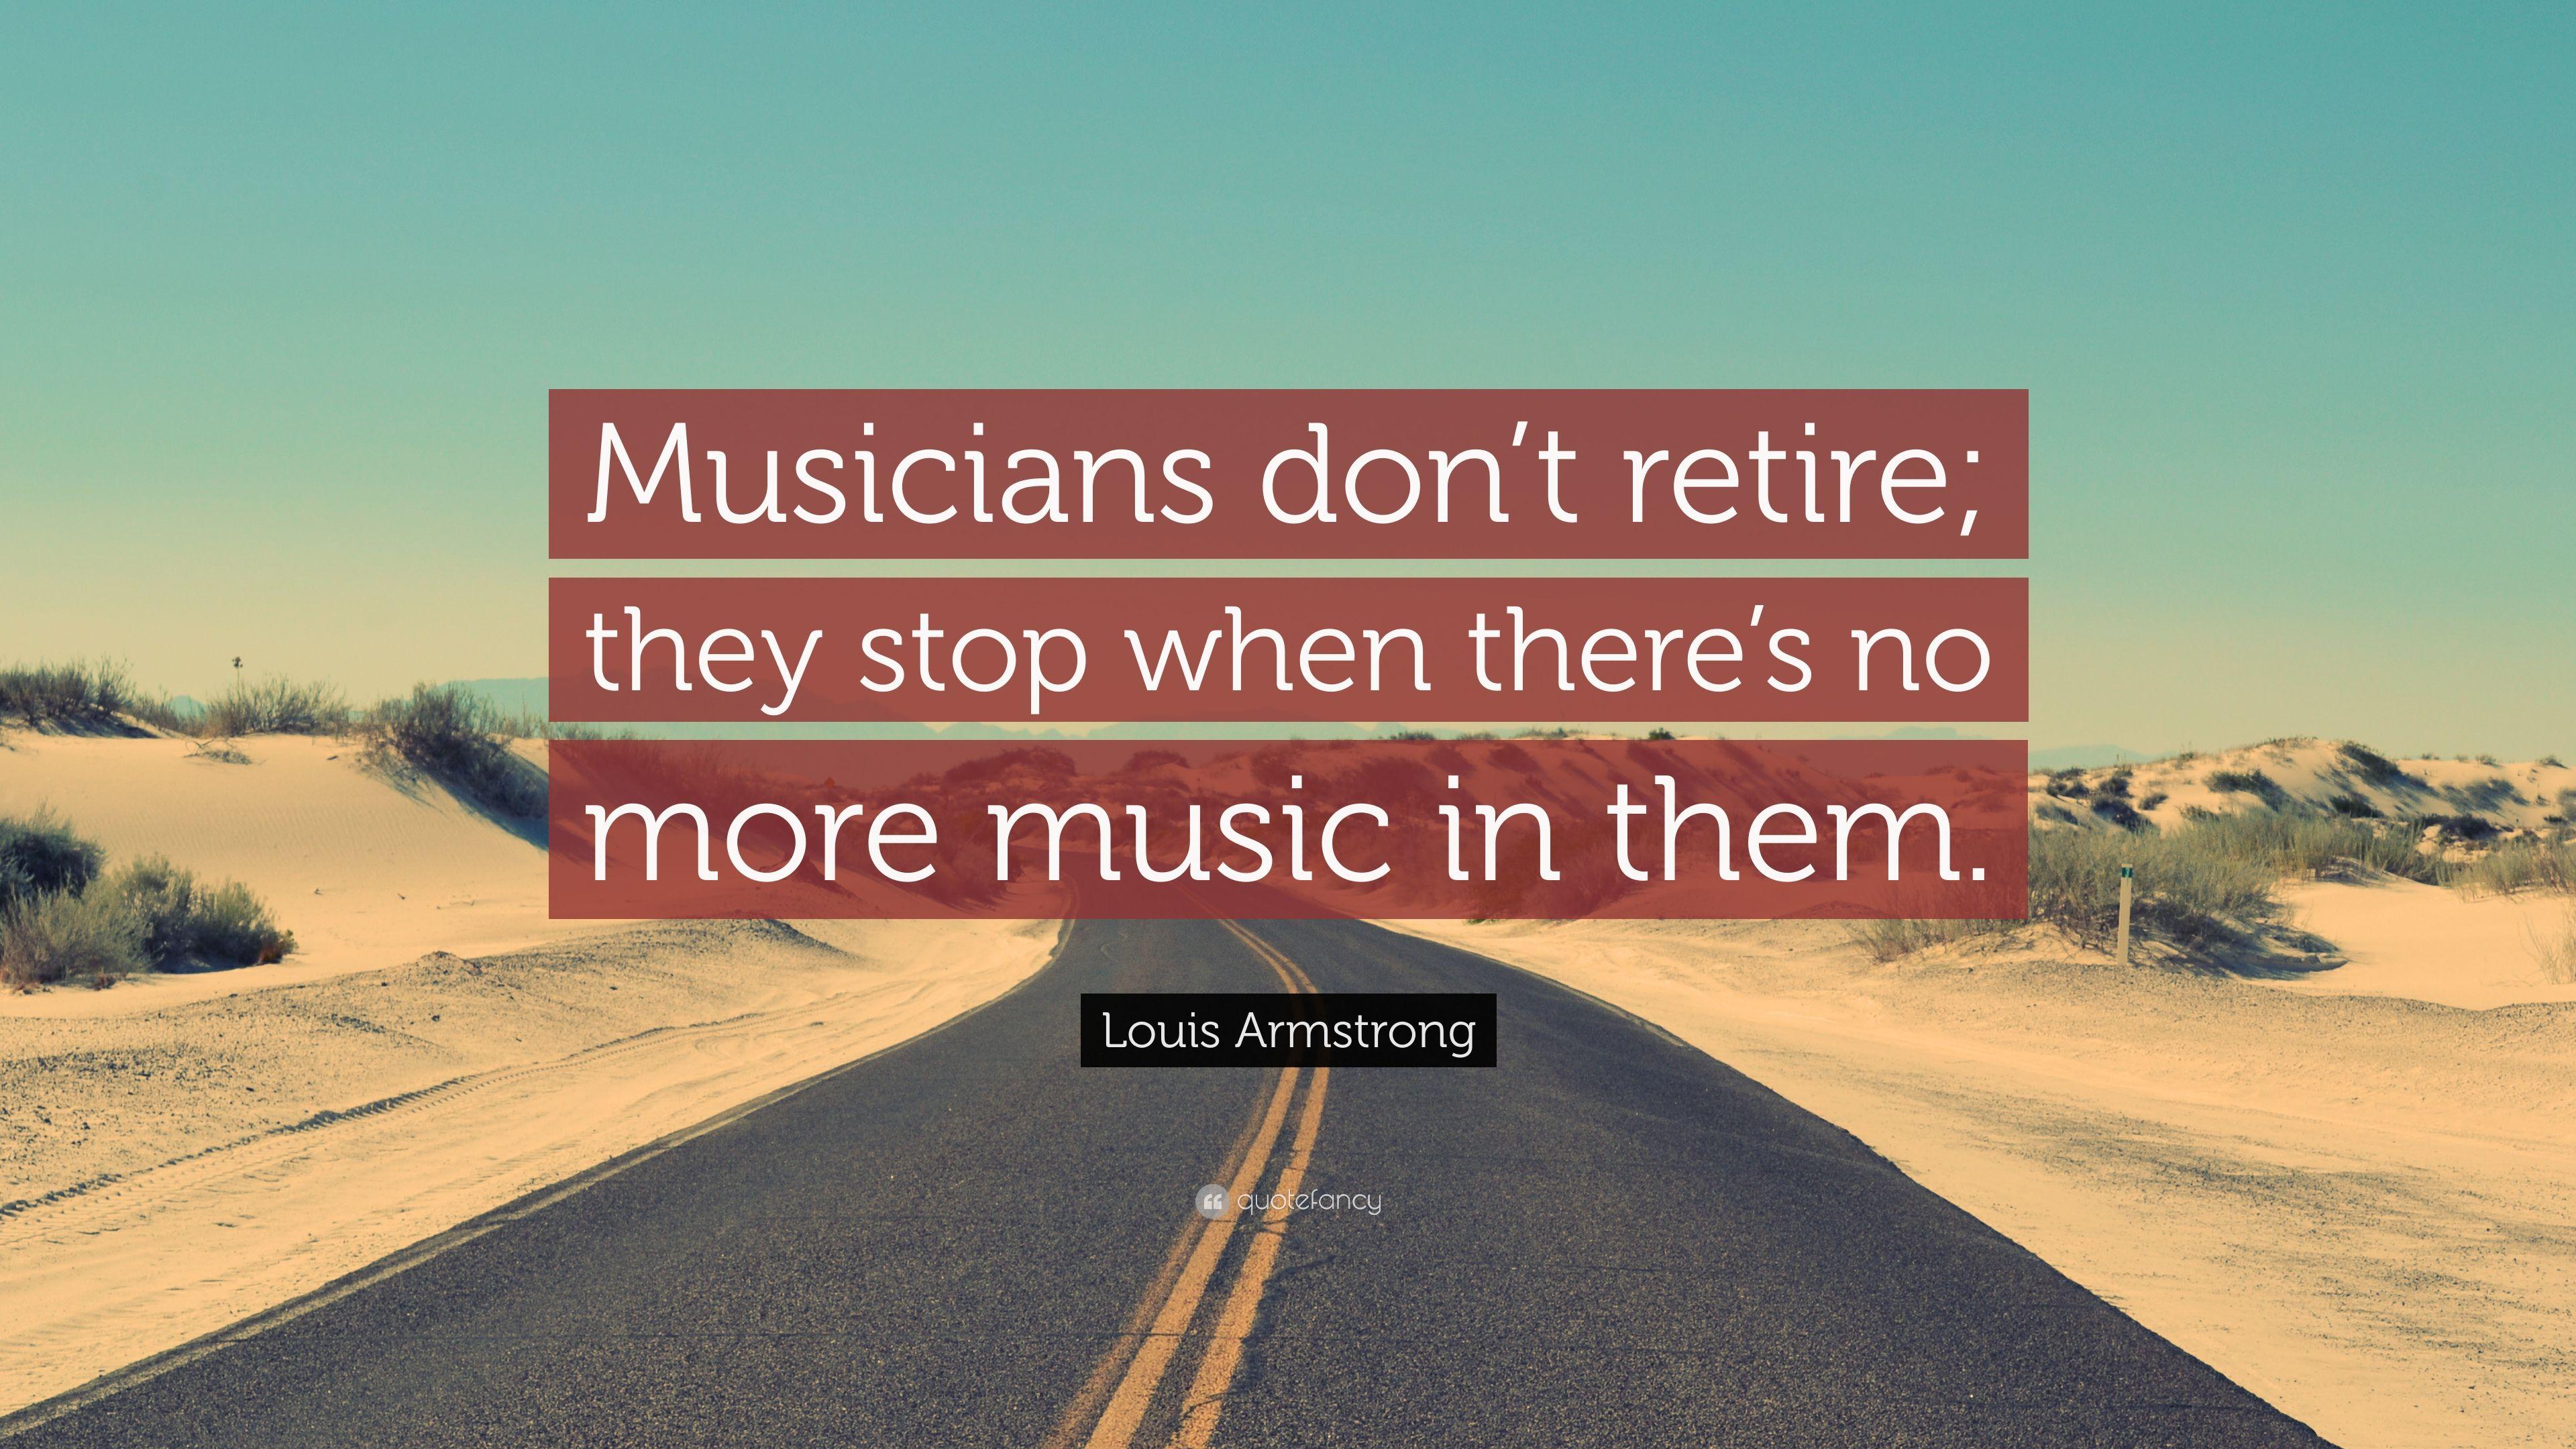 Louis Armstrong Quote: “Musicians don't retire; they stop when